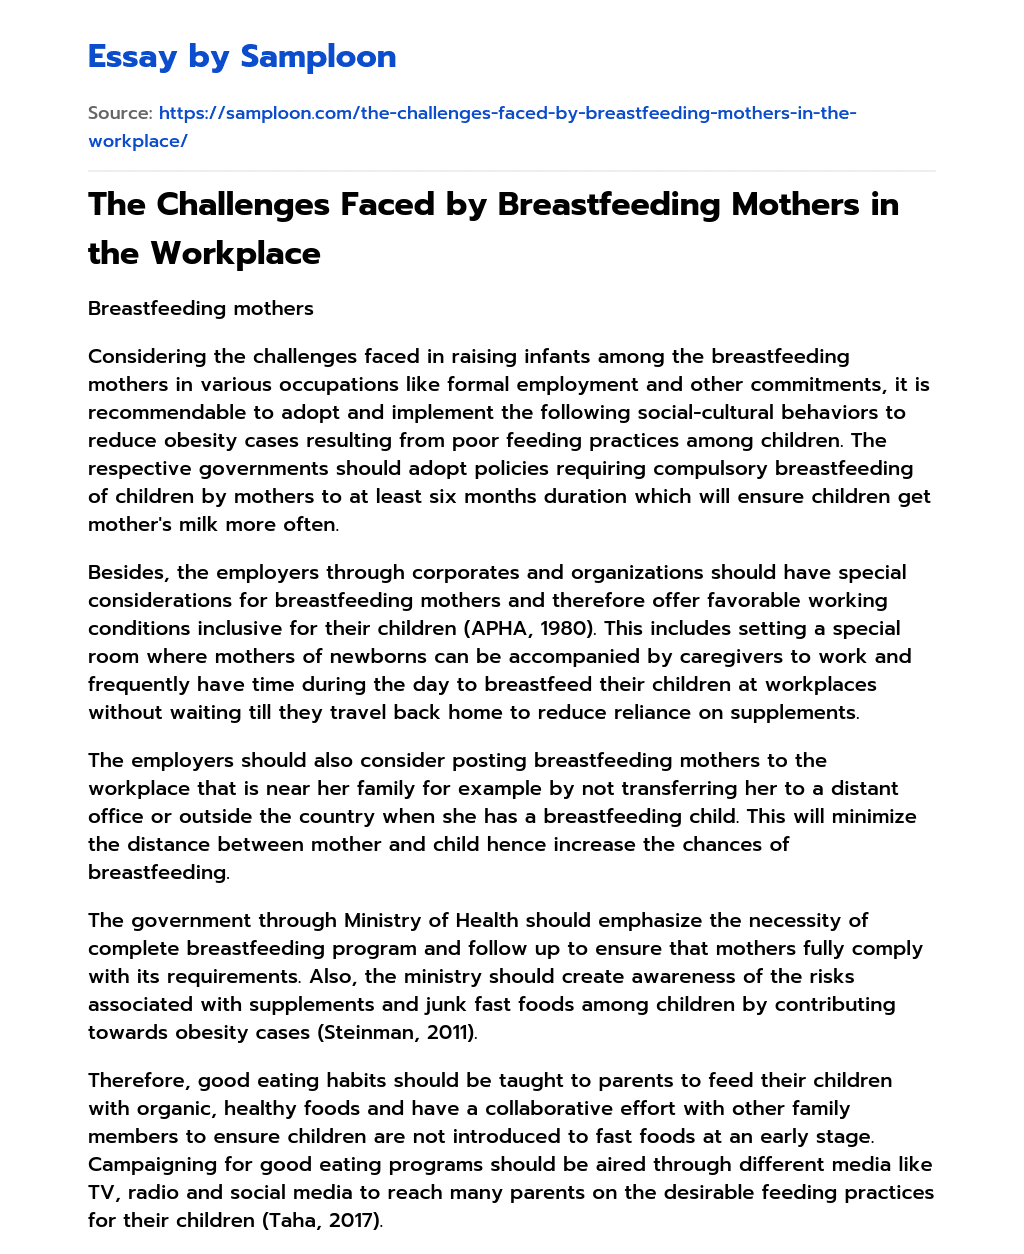 The Challenges Faced by Breastfeeding Mothers in the Workplace essay